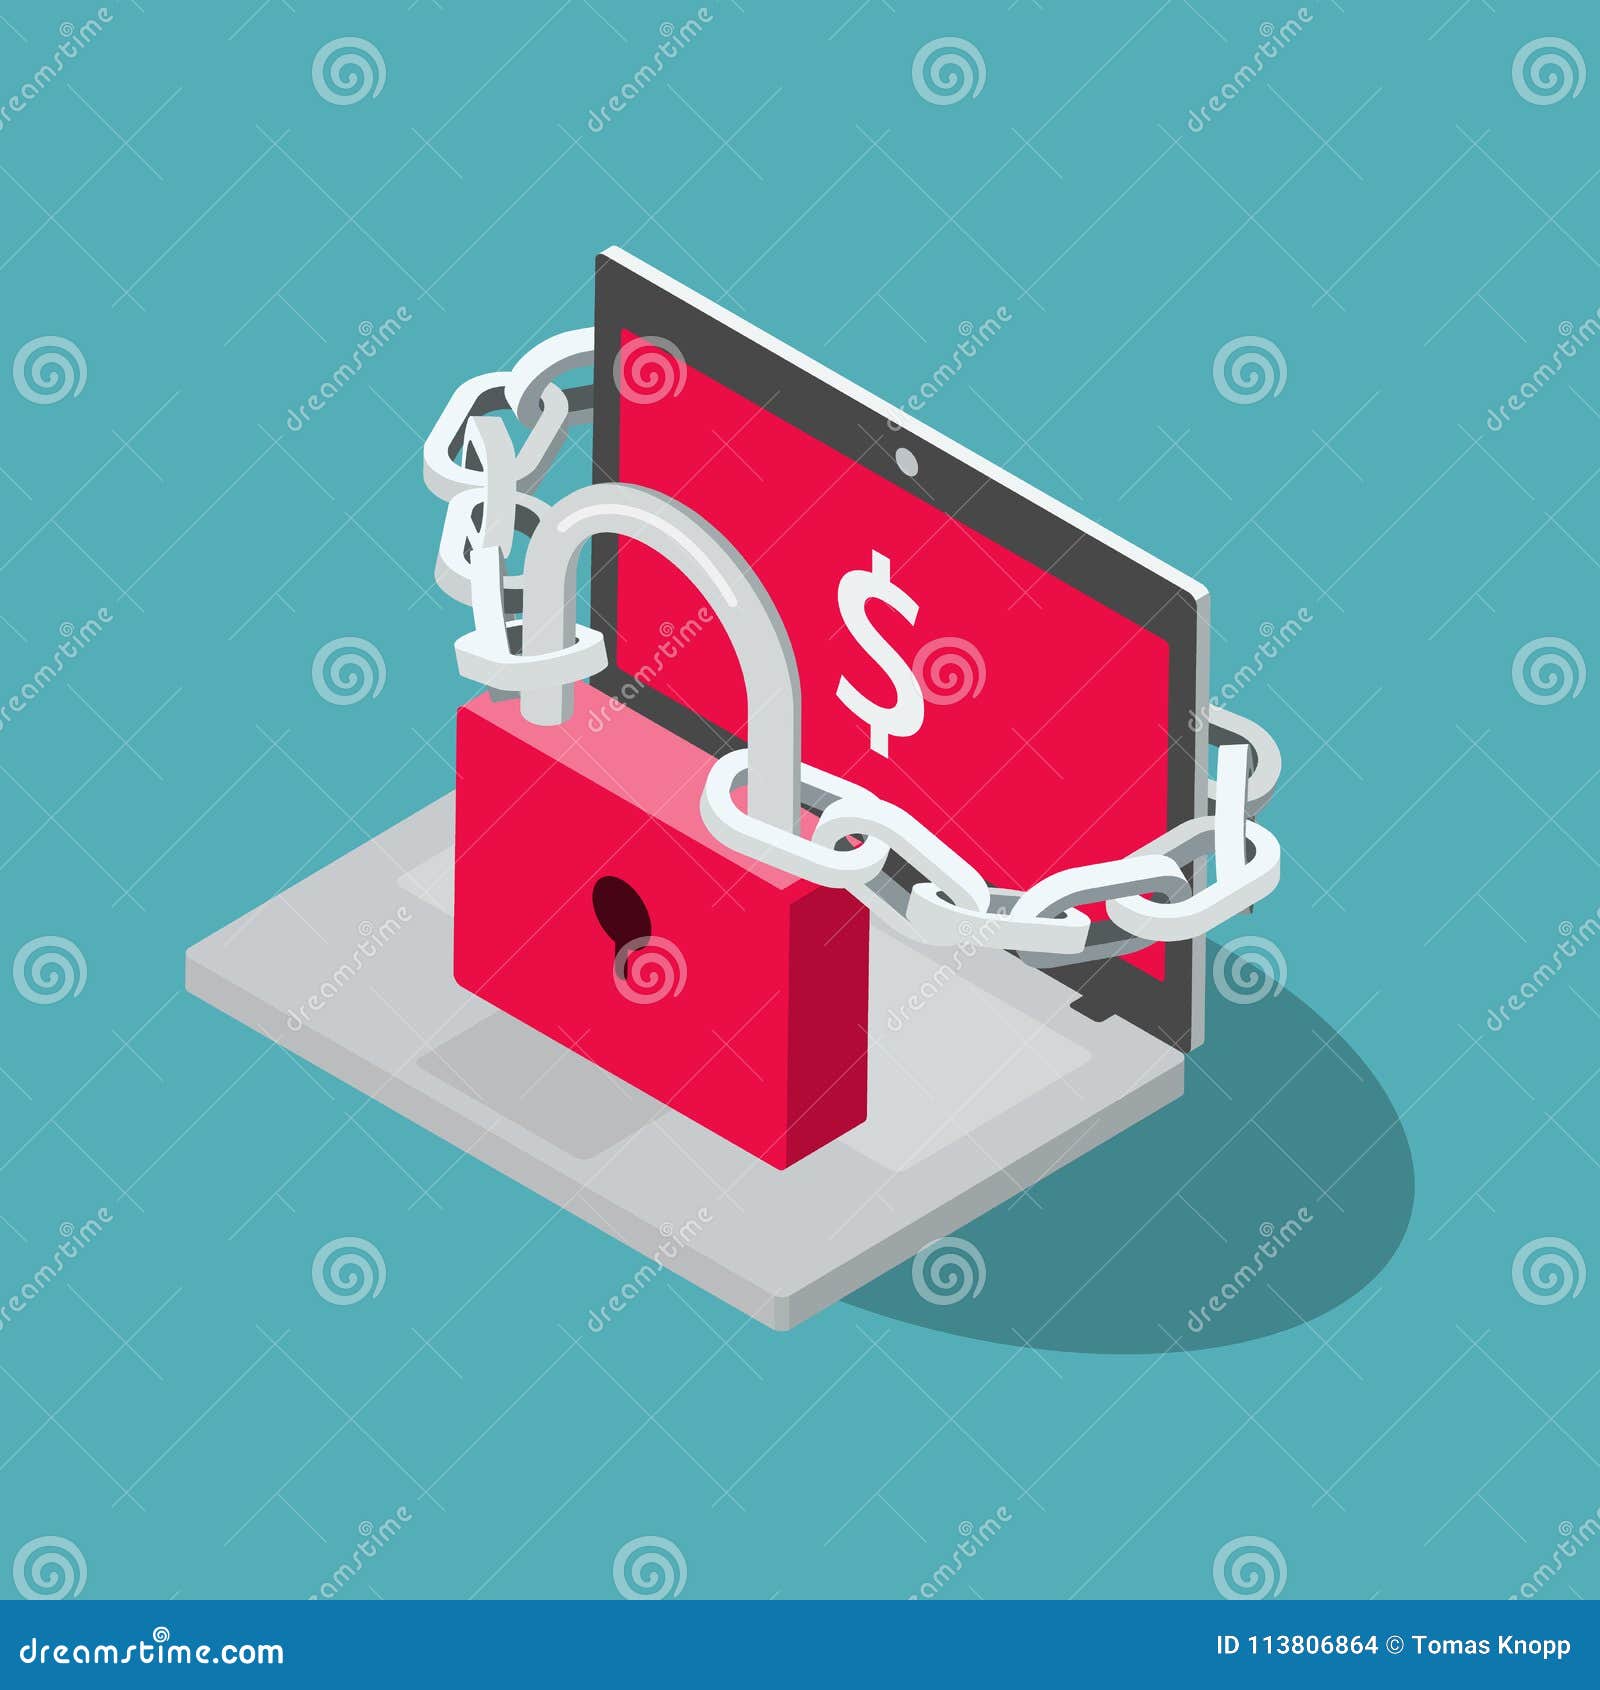 Ransomware Symbol With Laptop, Red Padlock And Chain Stock ...